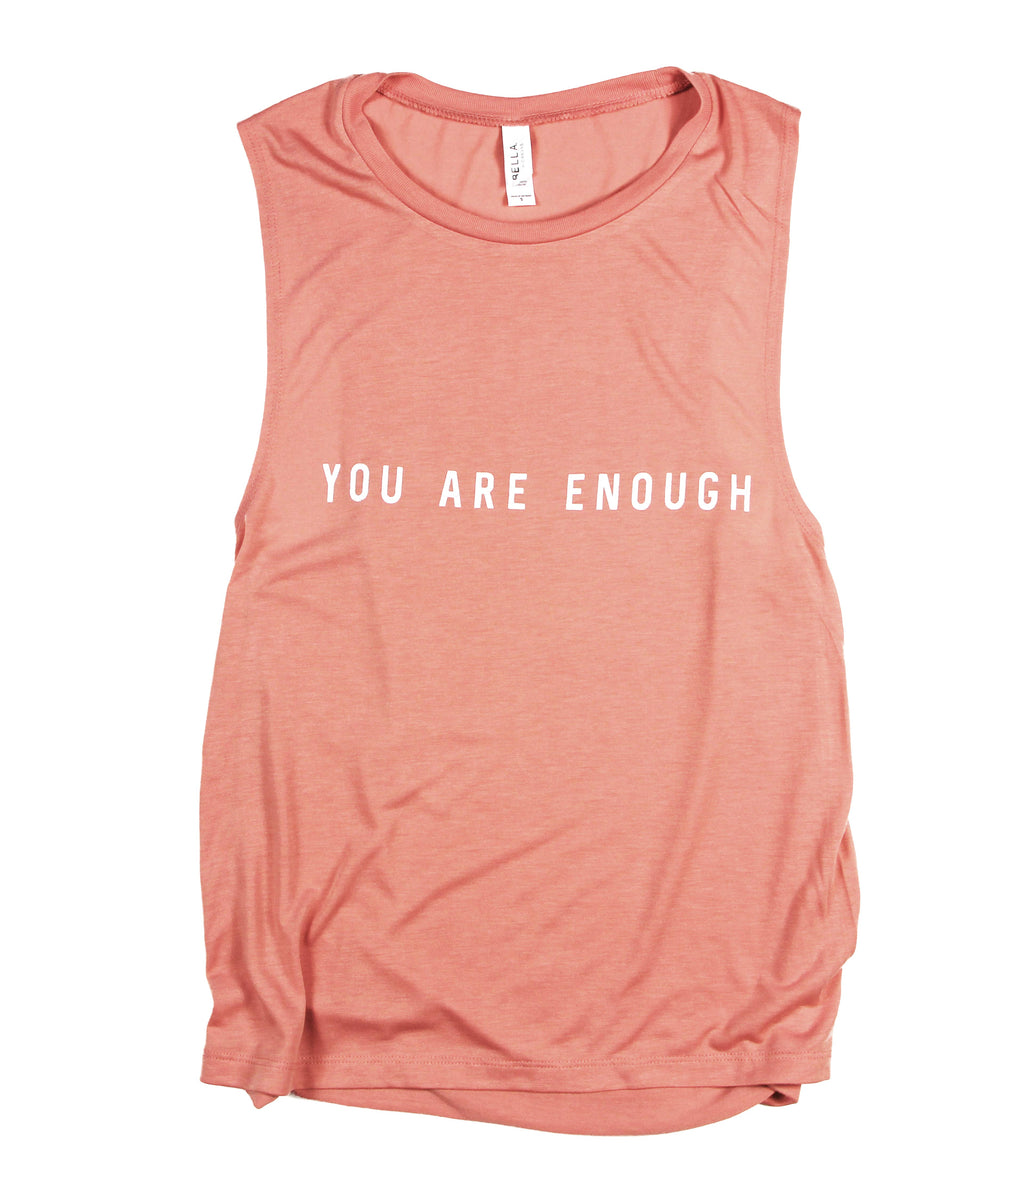 YOU ARE ENOUGH SUNSET WOMEN'S FLOWY MUSCLE TANK